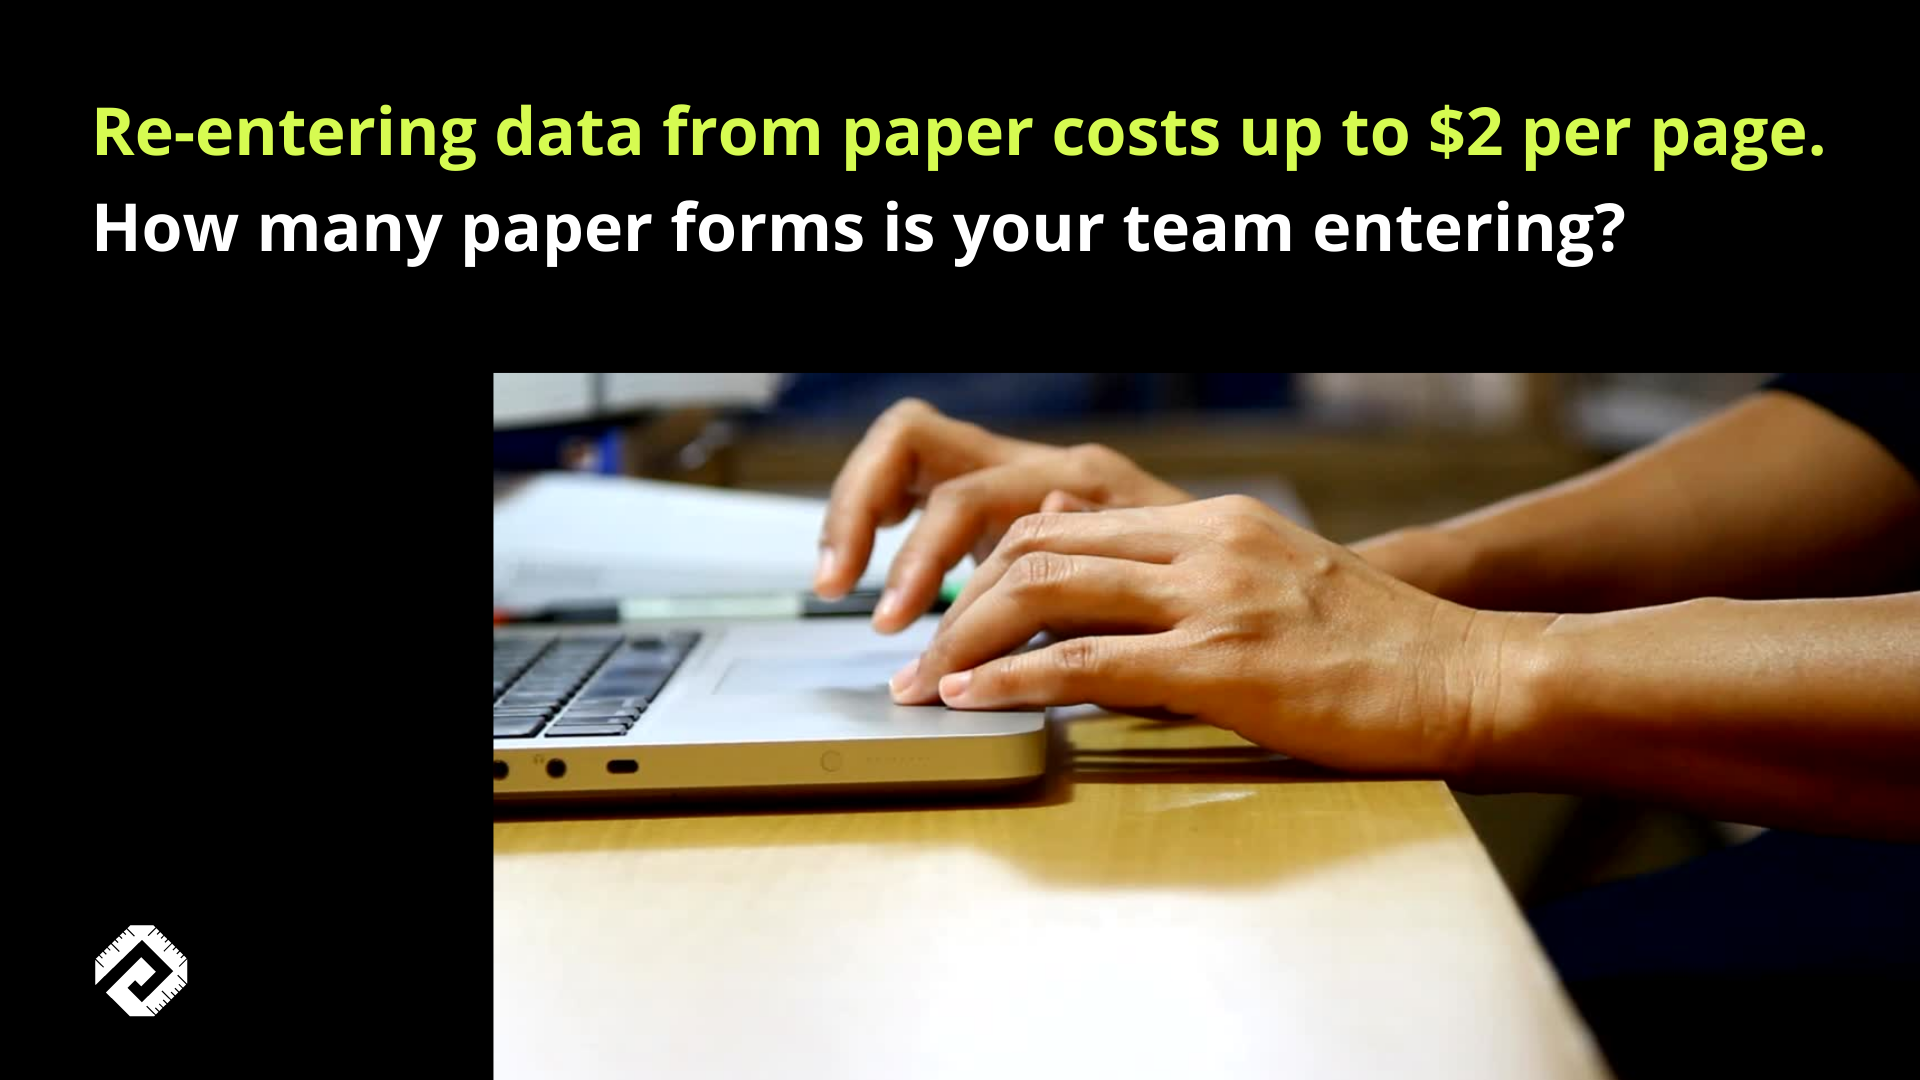 Re-entry of paper forms costs a company up to $2 per page.